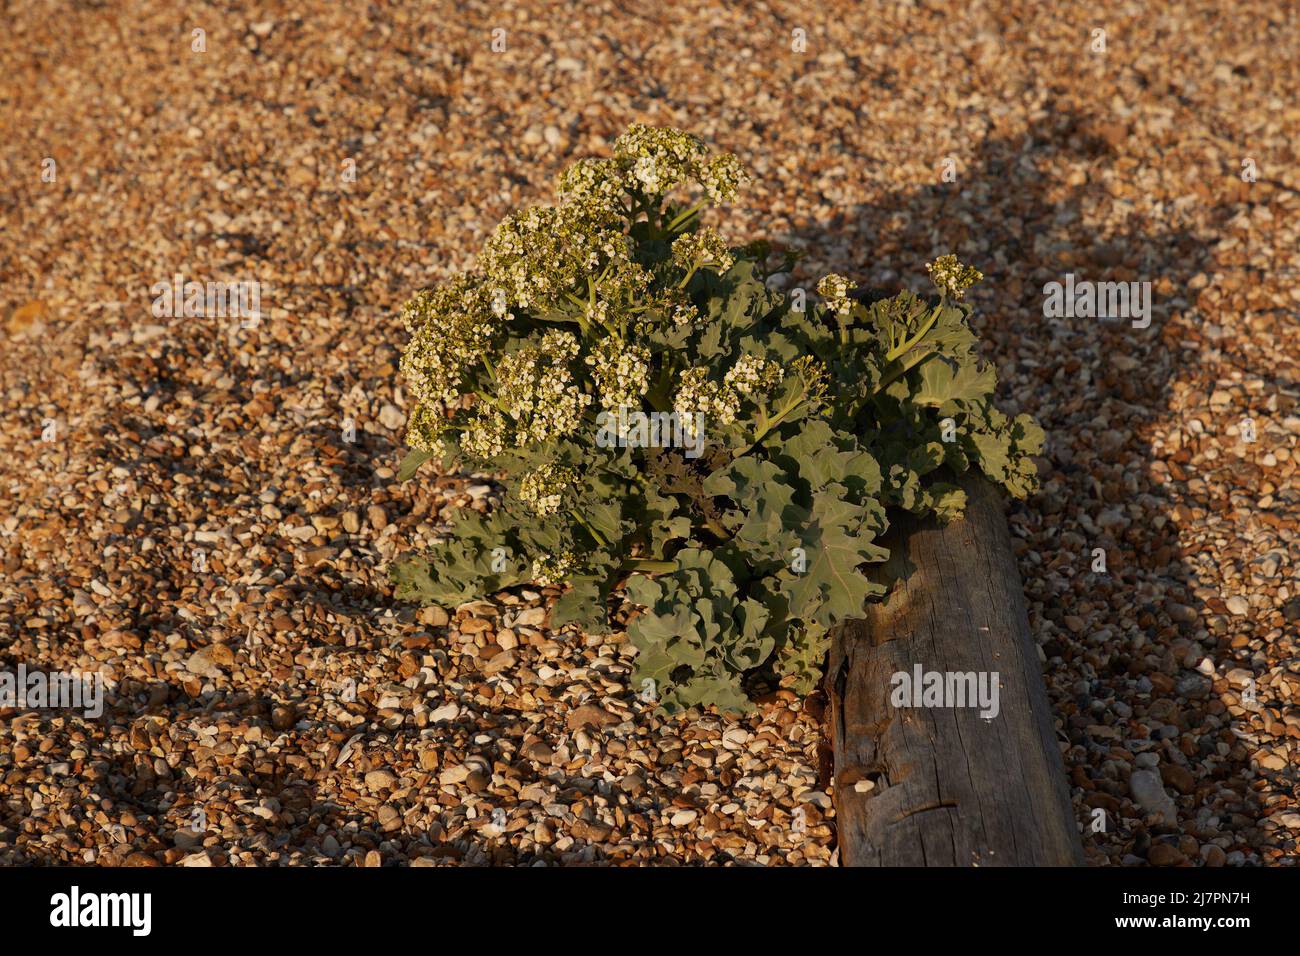 Flowering sea kale seen against a piece of driftwood in gravel on the beach on the south coast of the UK. Stock Photo